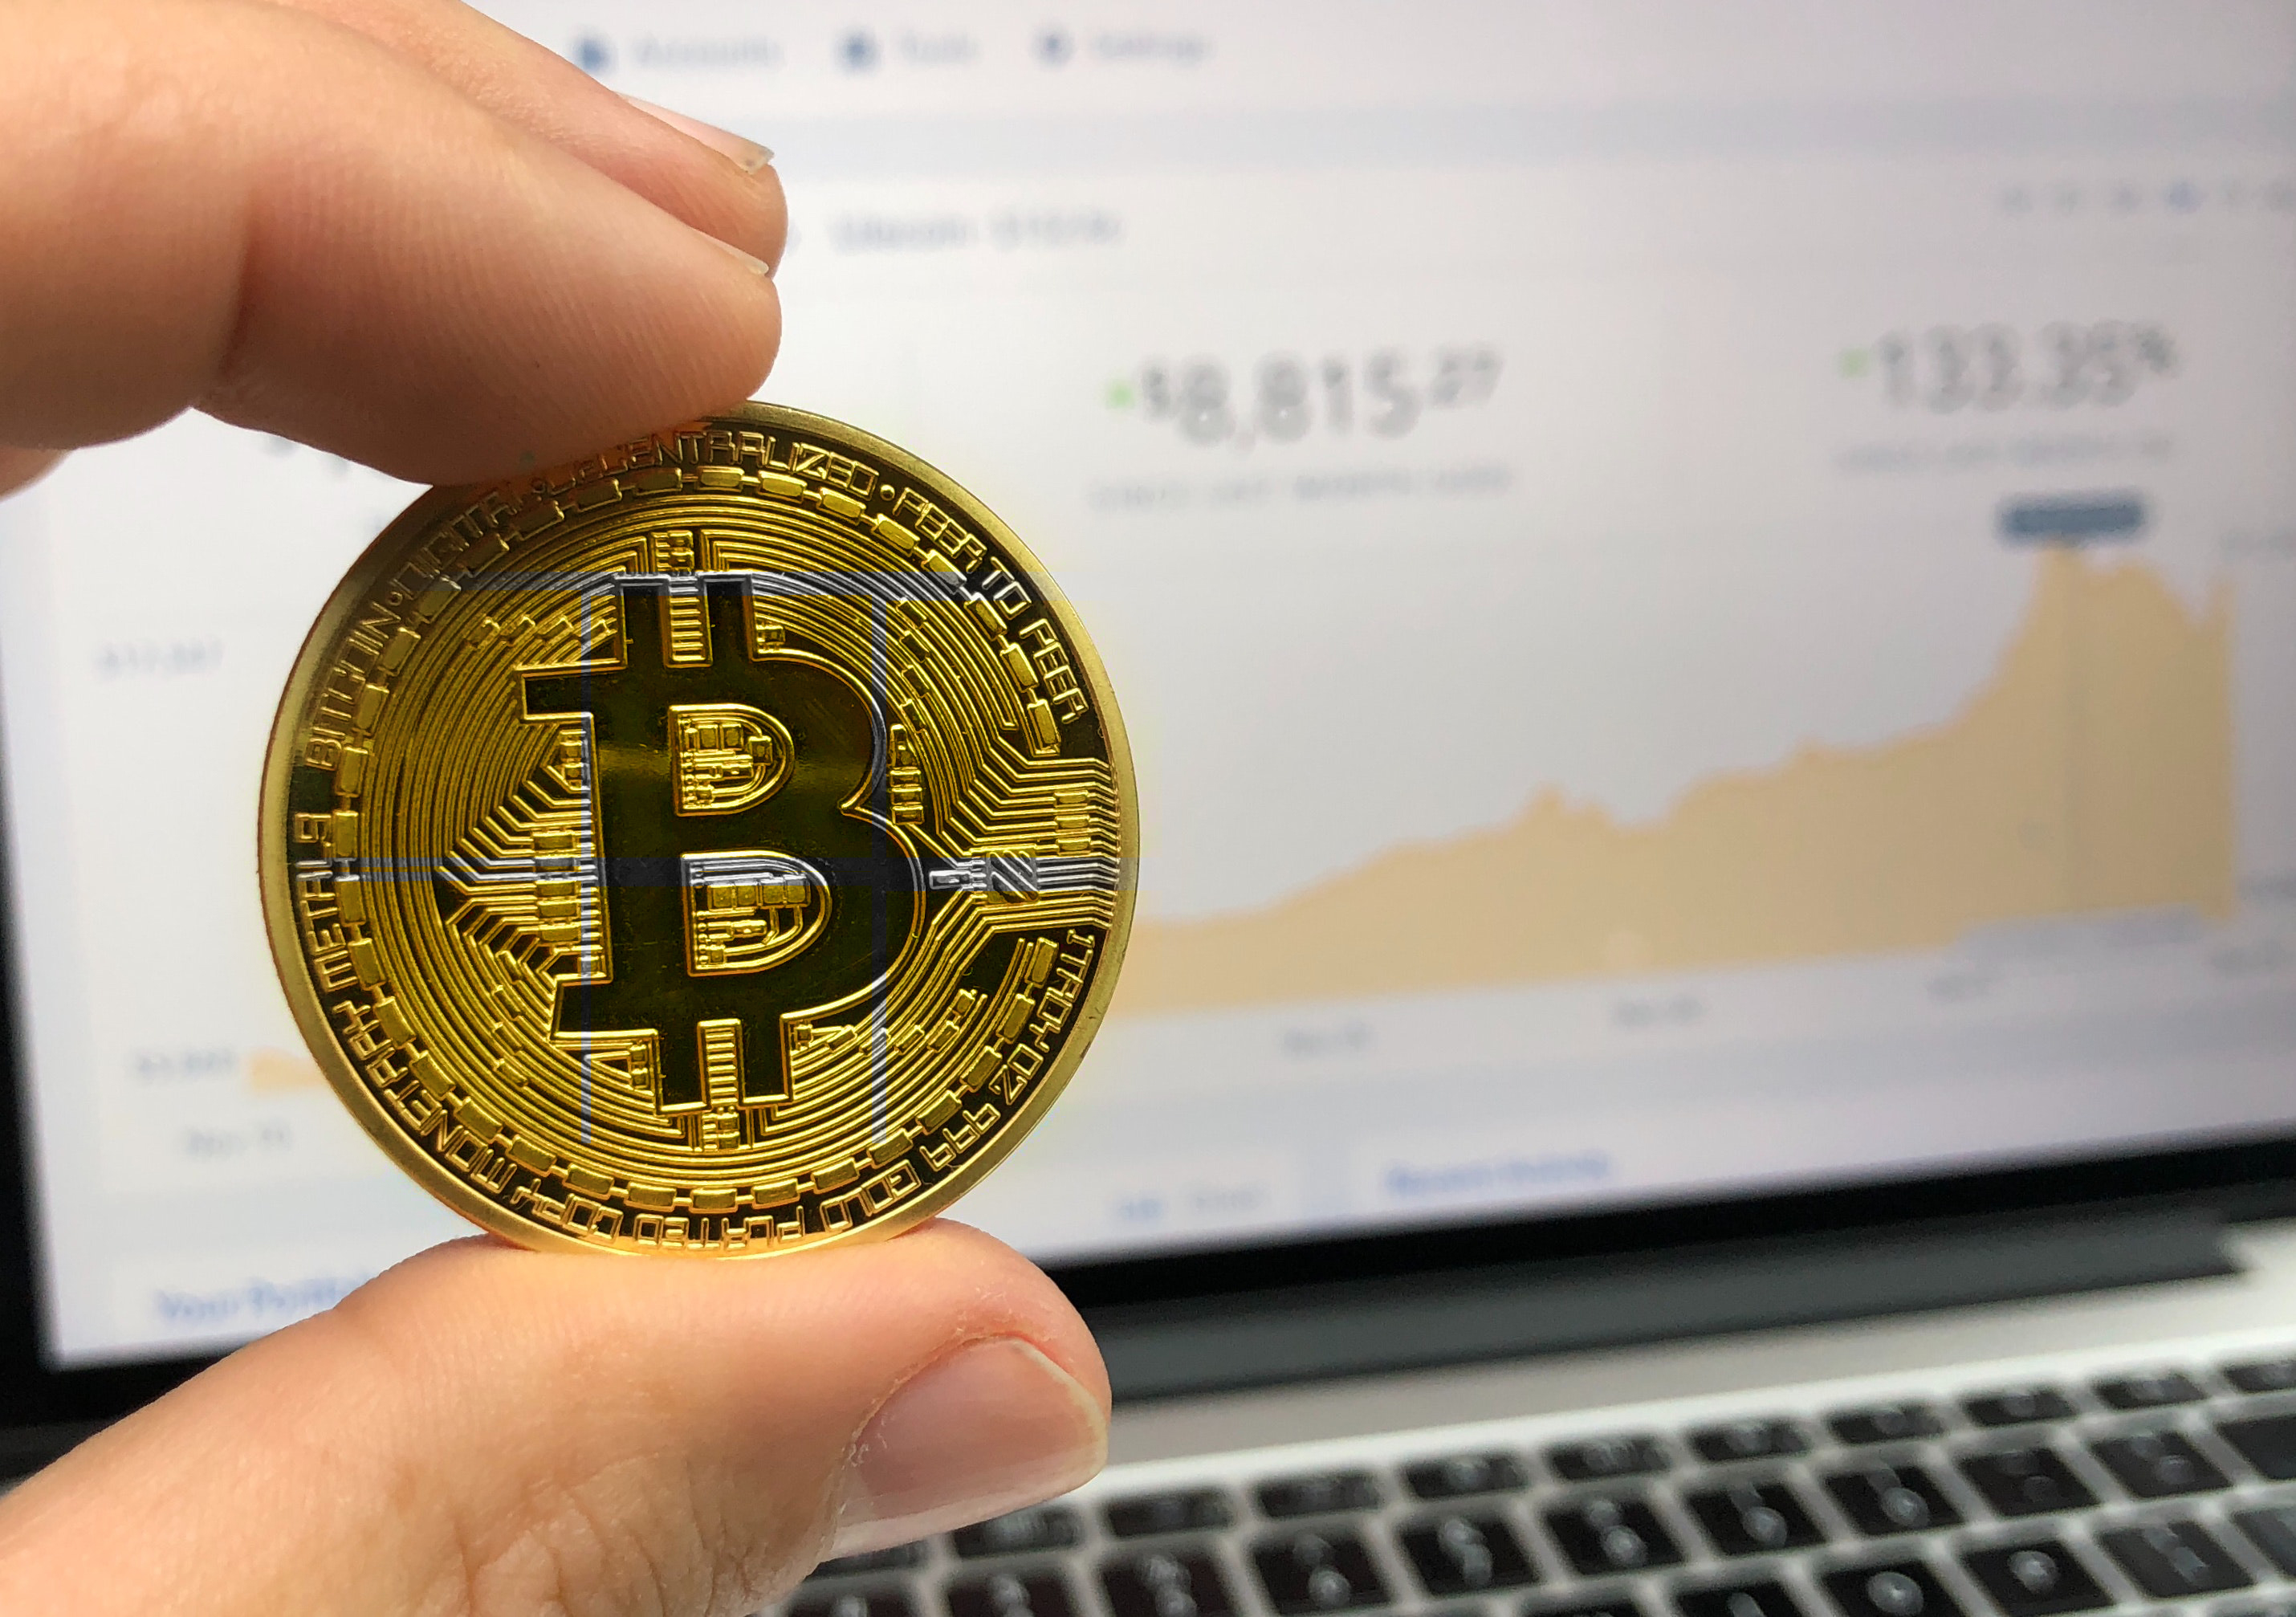 Bitcoin regained value and forecasts puts its price at 55000 USD by 2020